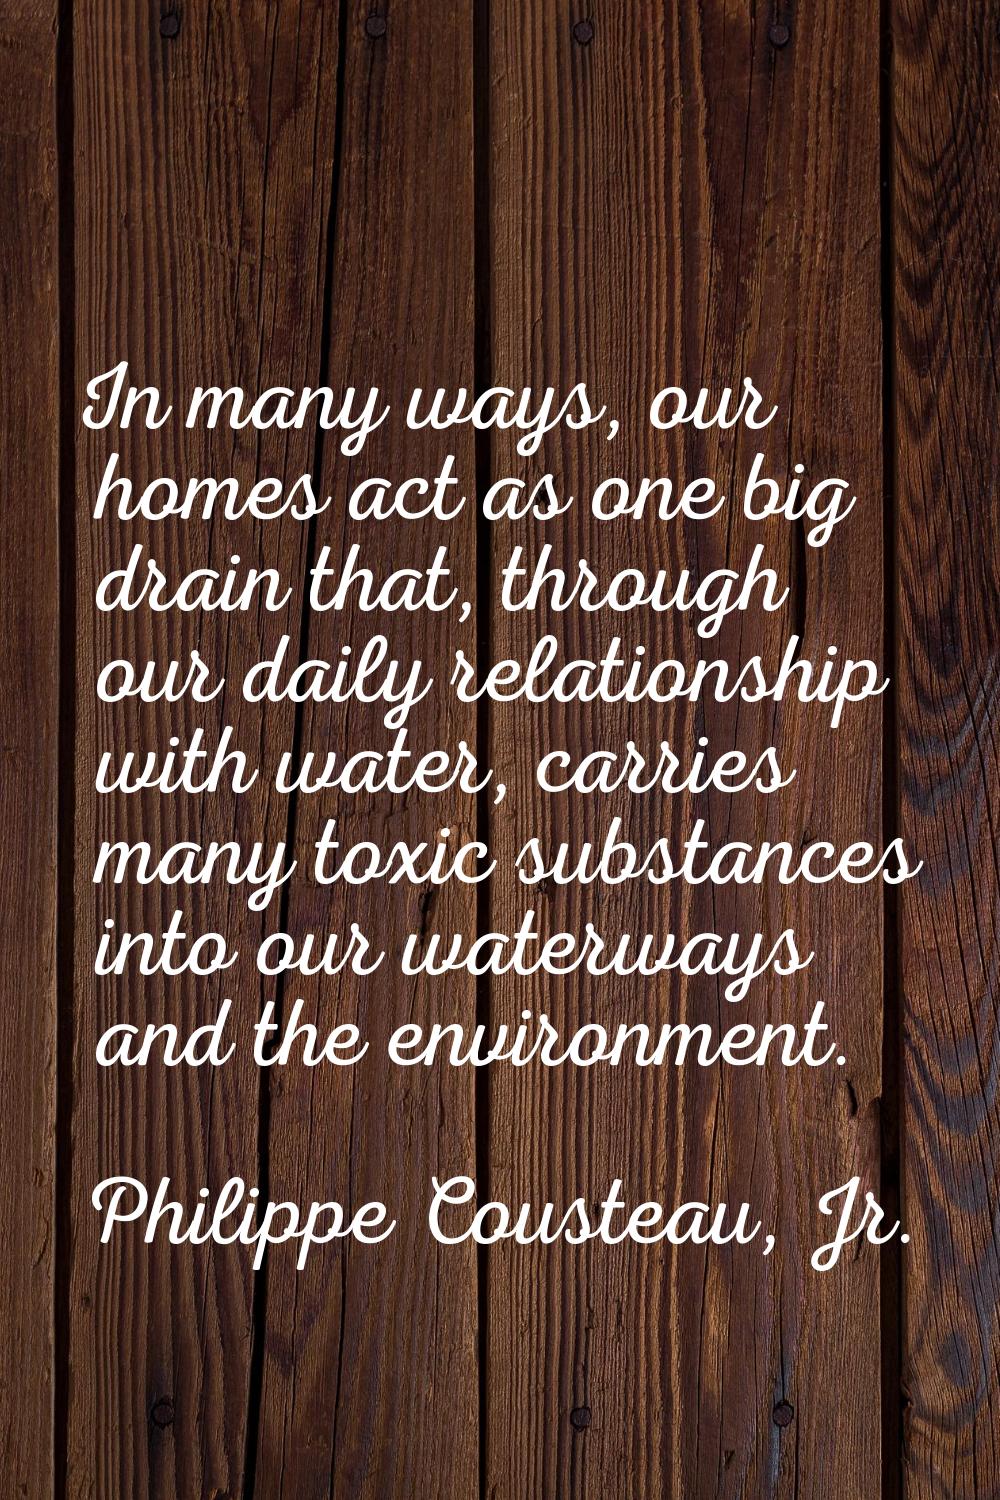 In many ways, our homes act as one big drain that, through our daily relationship with water, carri